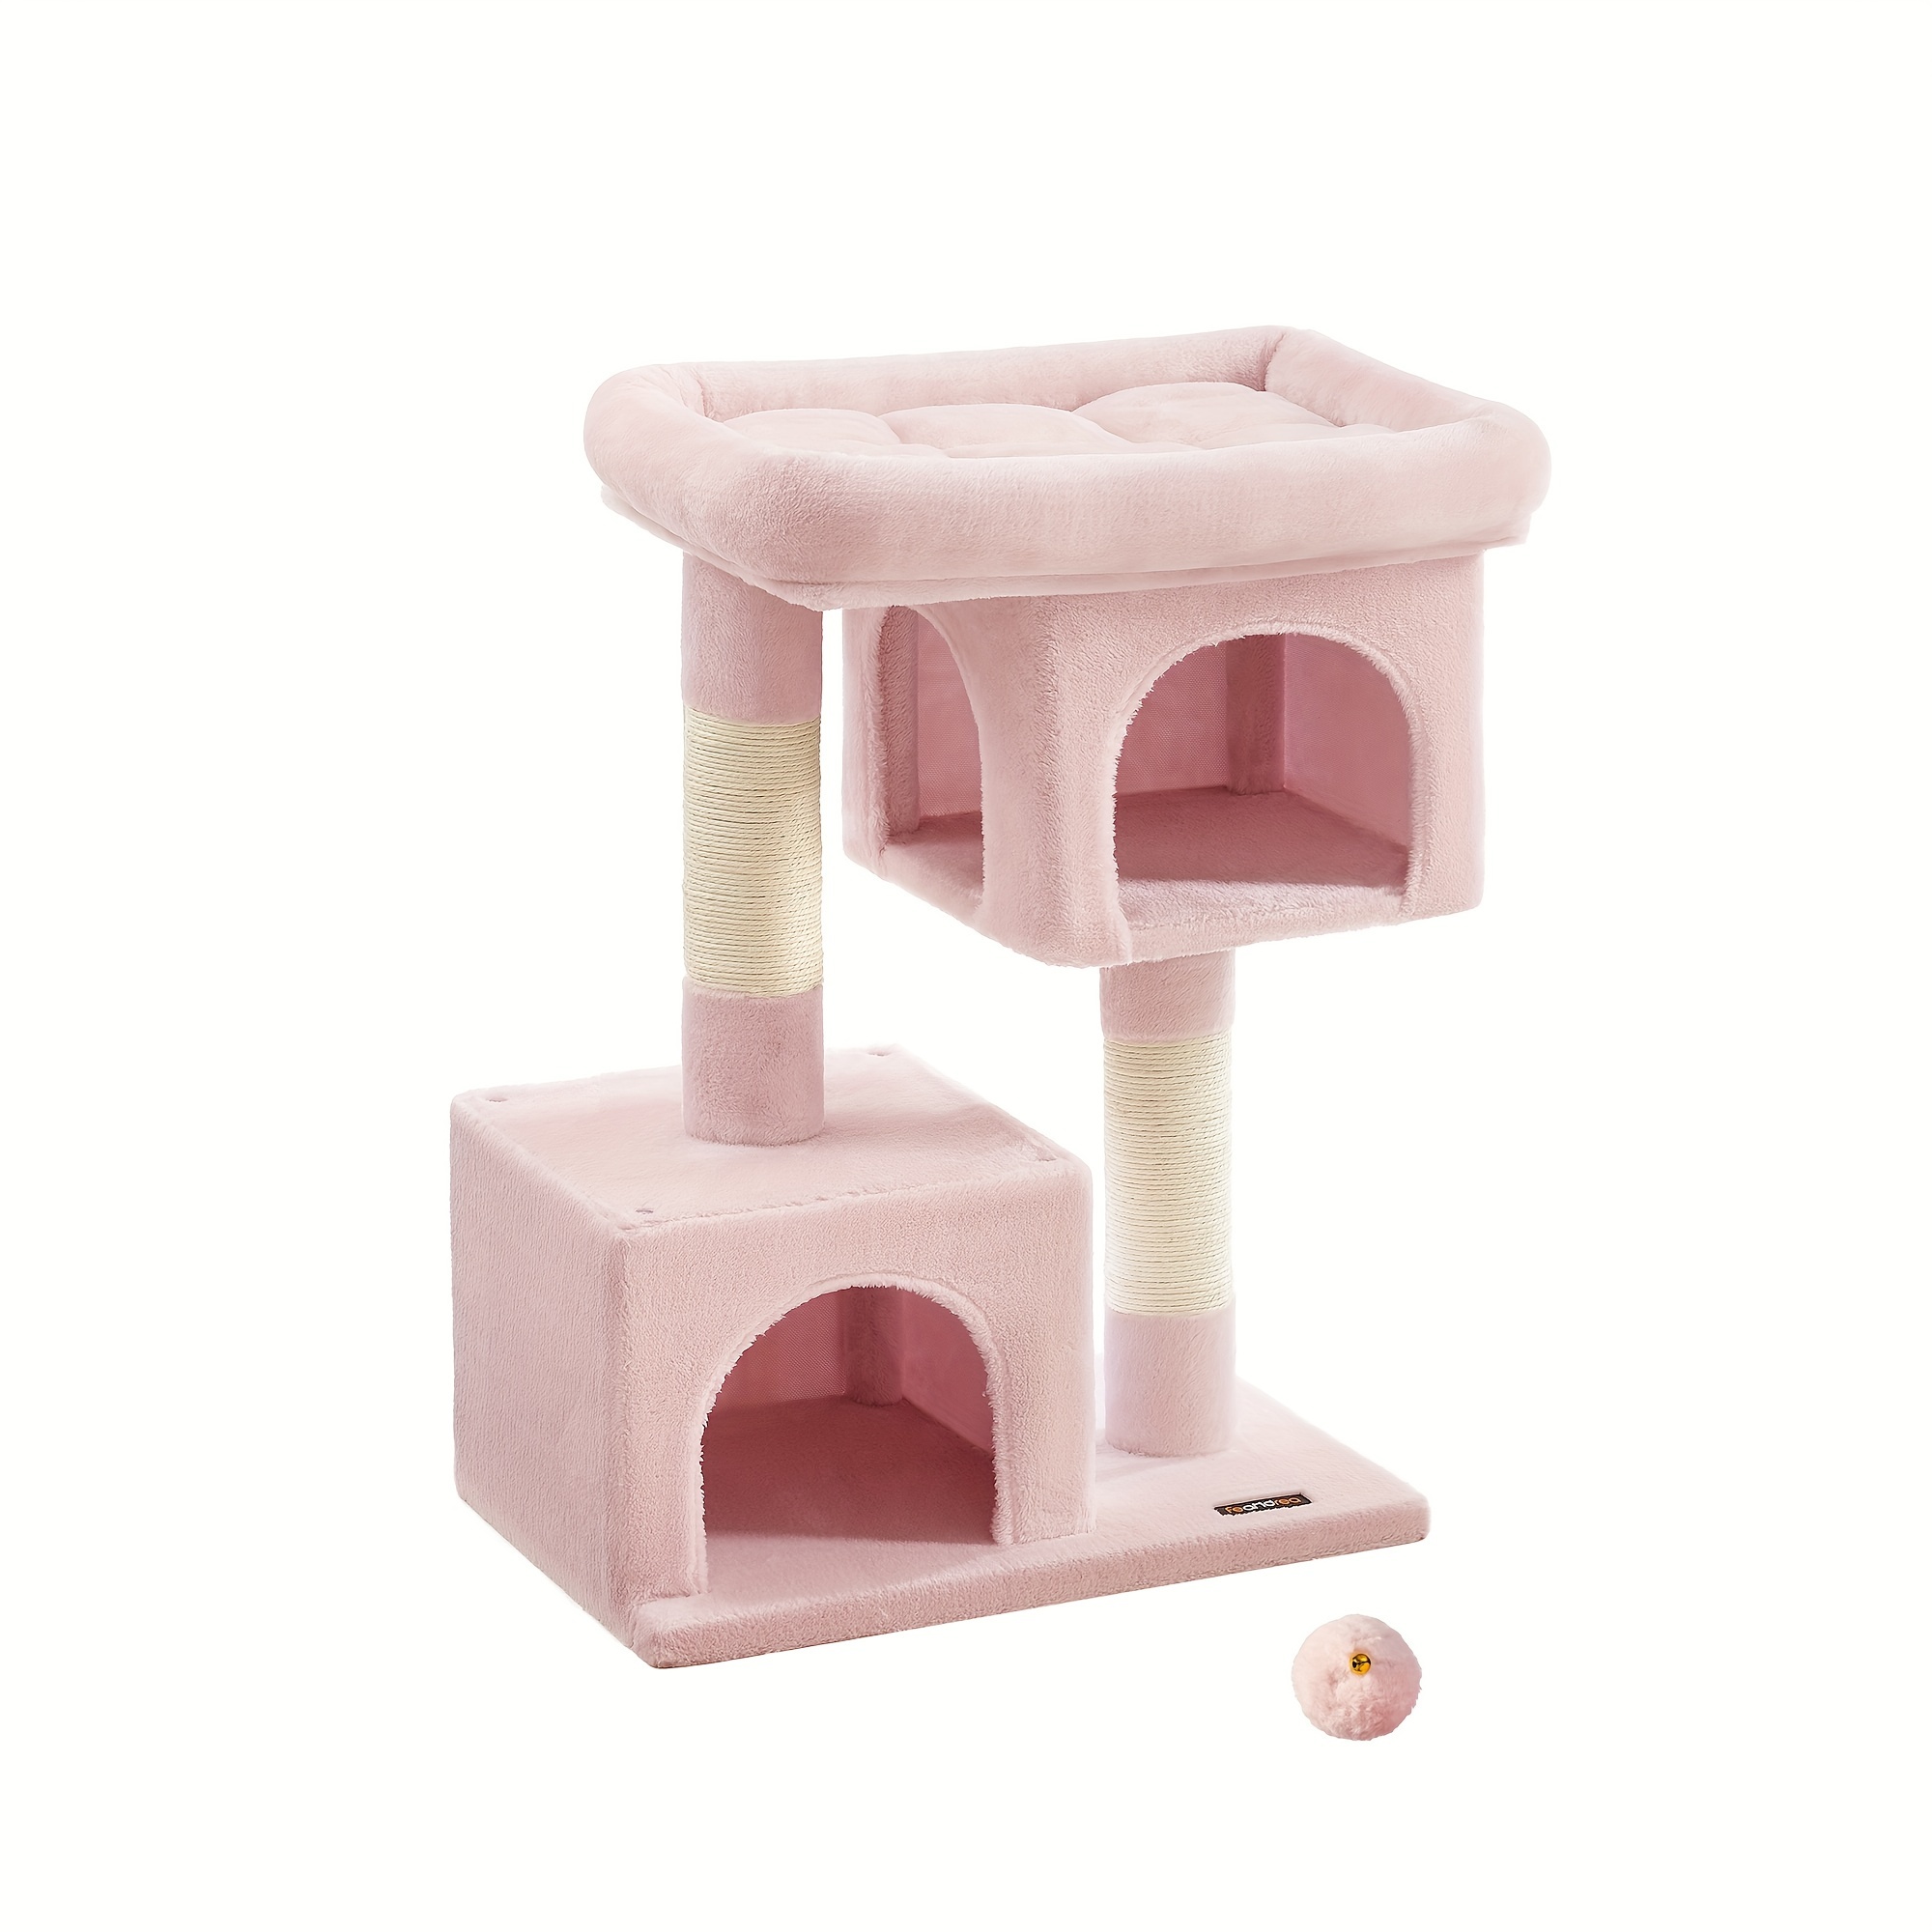 

Feandrea Cat Tree, 33.1-inch Cat Tower, L, Cat Condo For Large Cats Up To 16 Lb, Large Cat Perch, 2 Cat Caves, Scratching Post